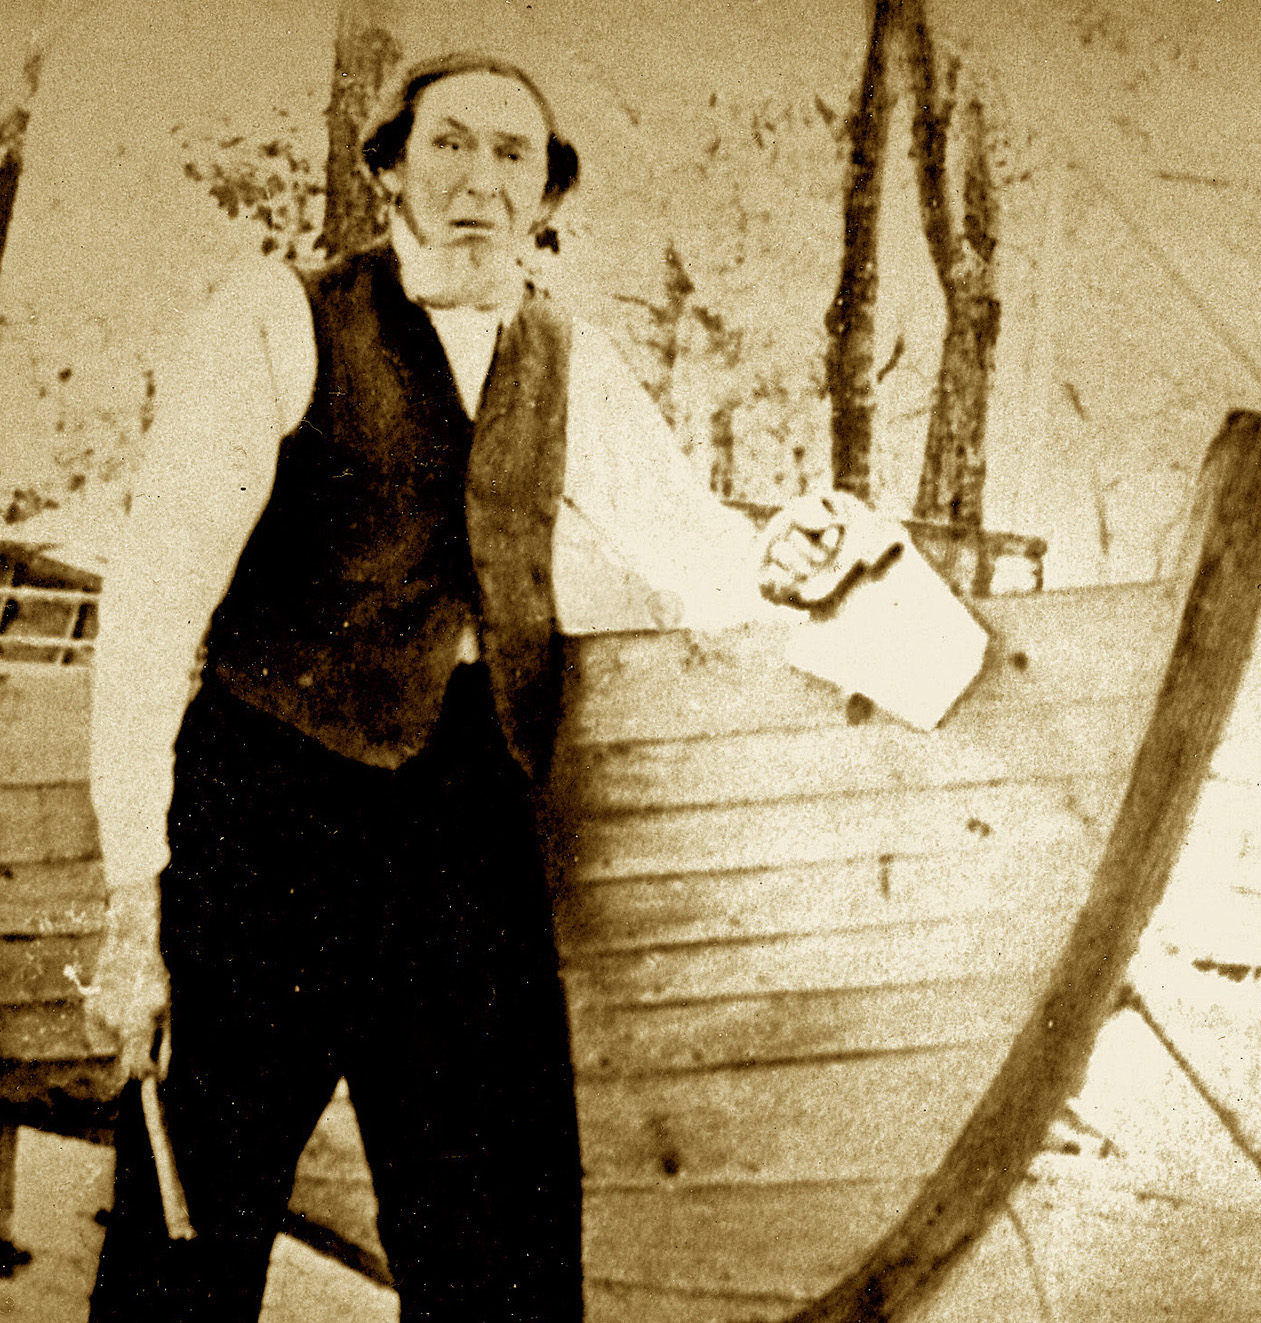 A true Ca’e Banker: Devine Guthrie, preacher, whaler, and boatbuilder, as photographed at Diamond City. Credit: Core Sound Waterfowl Museum & Heritage Center